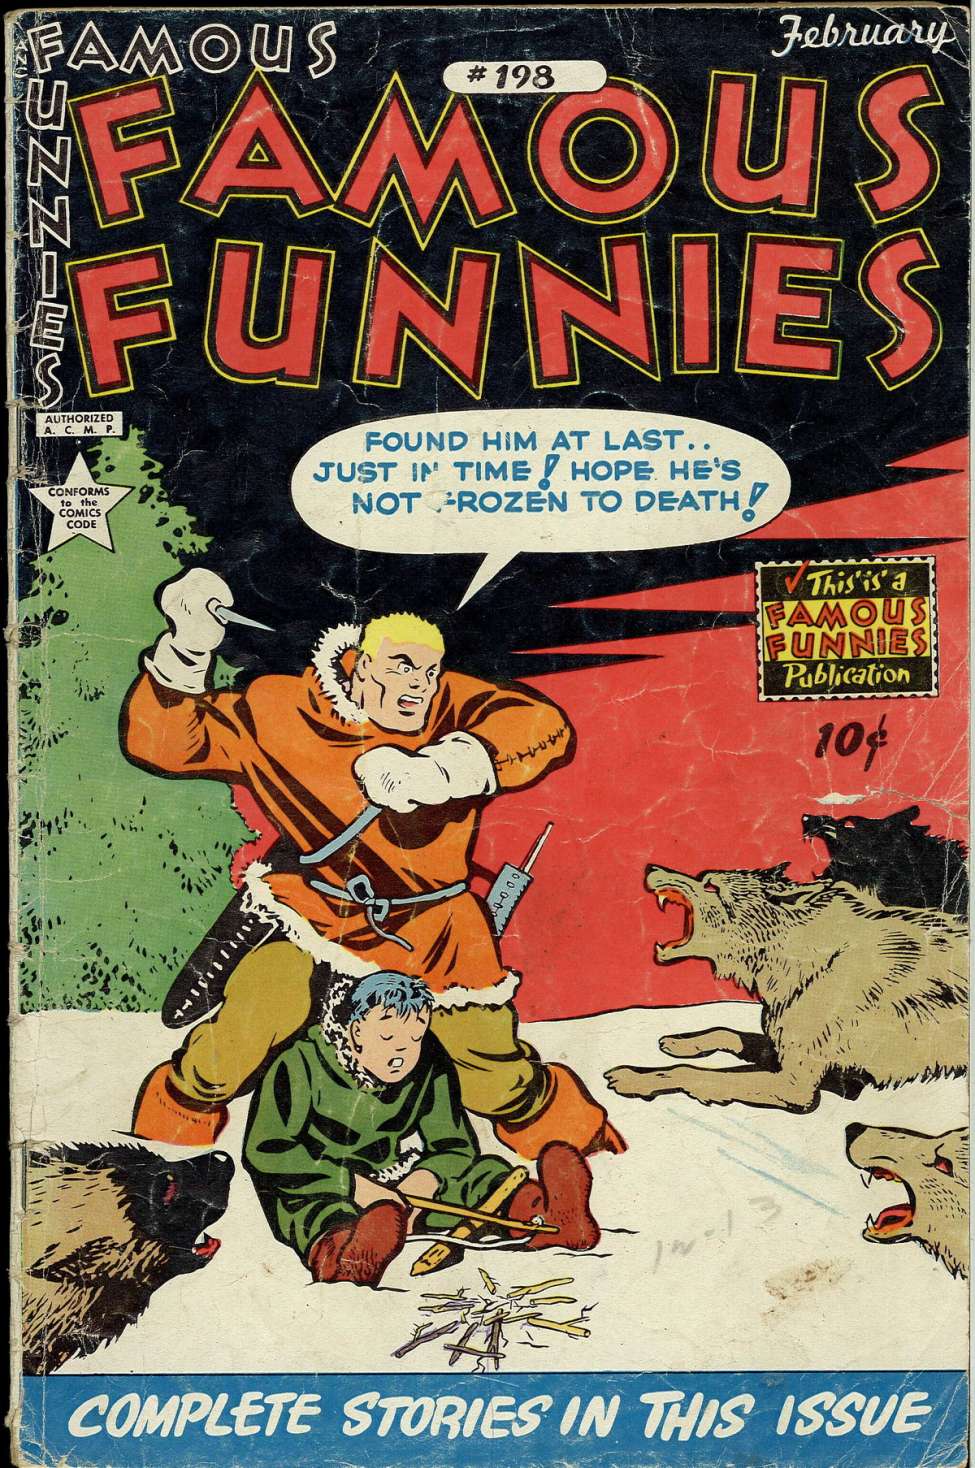 Book Cover For Famous Funnies 198